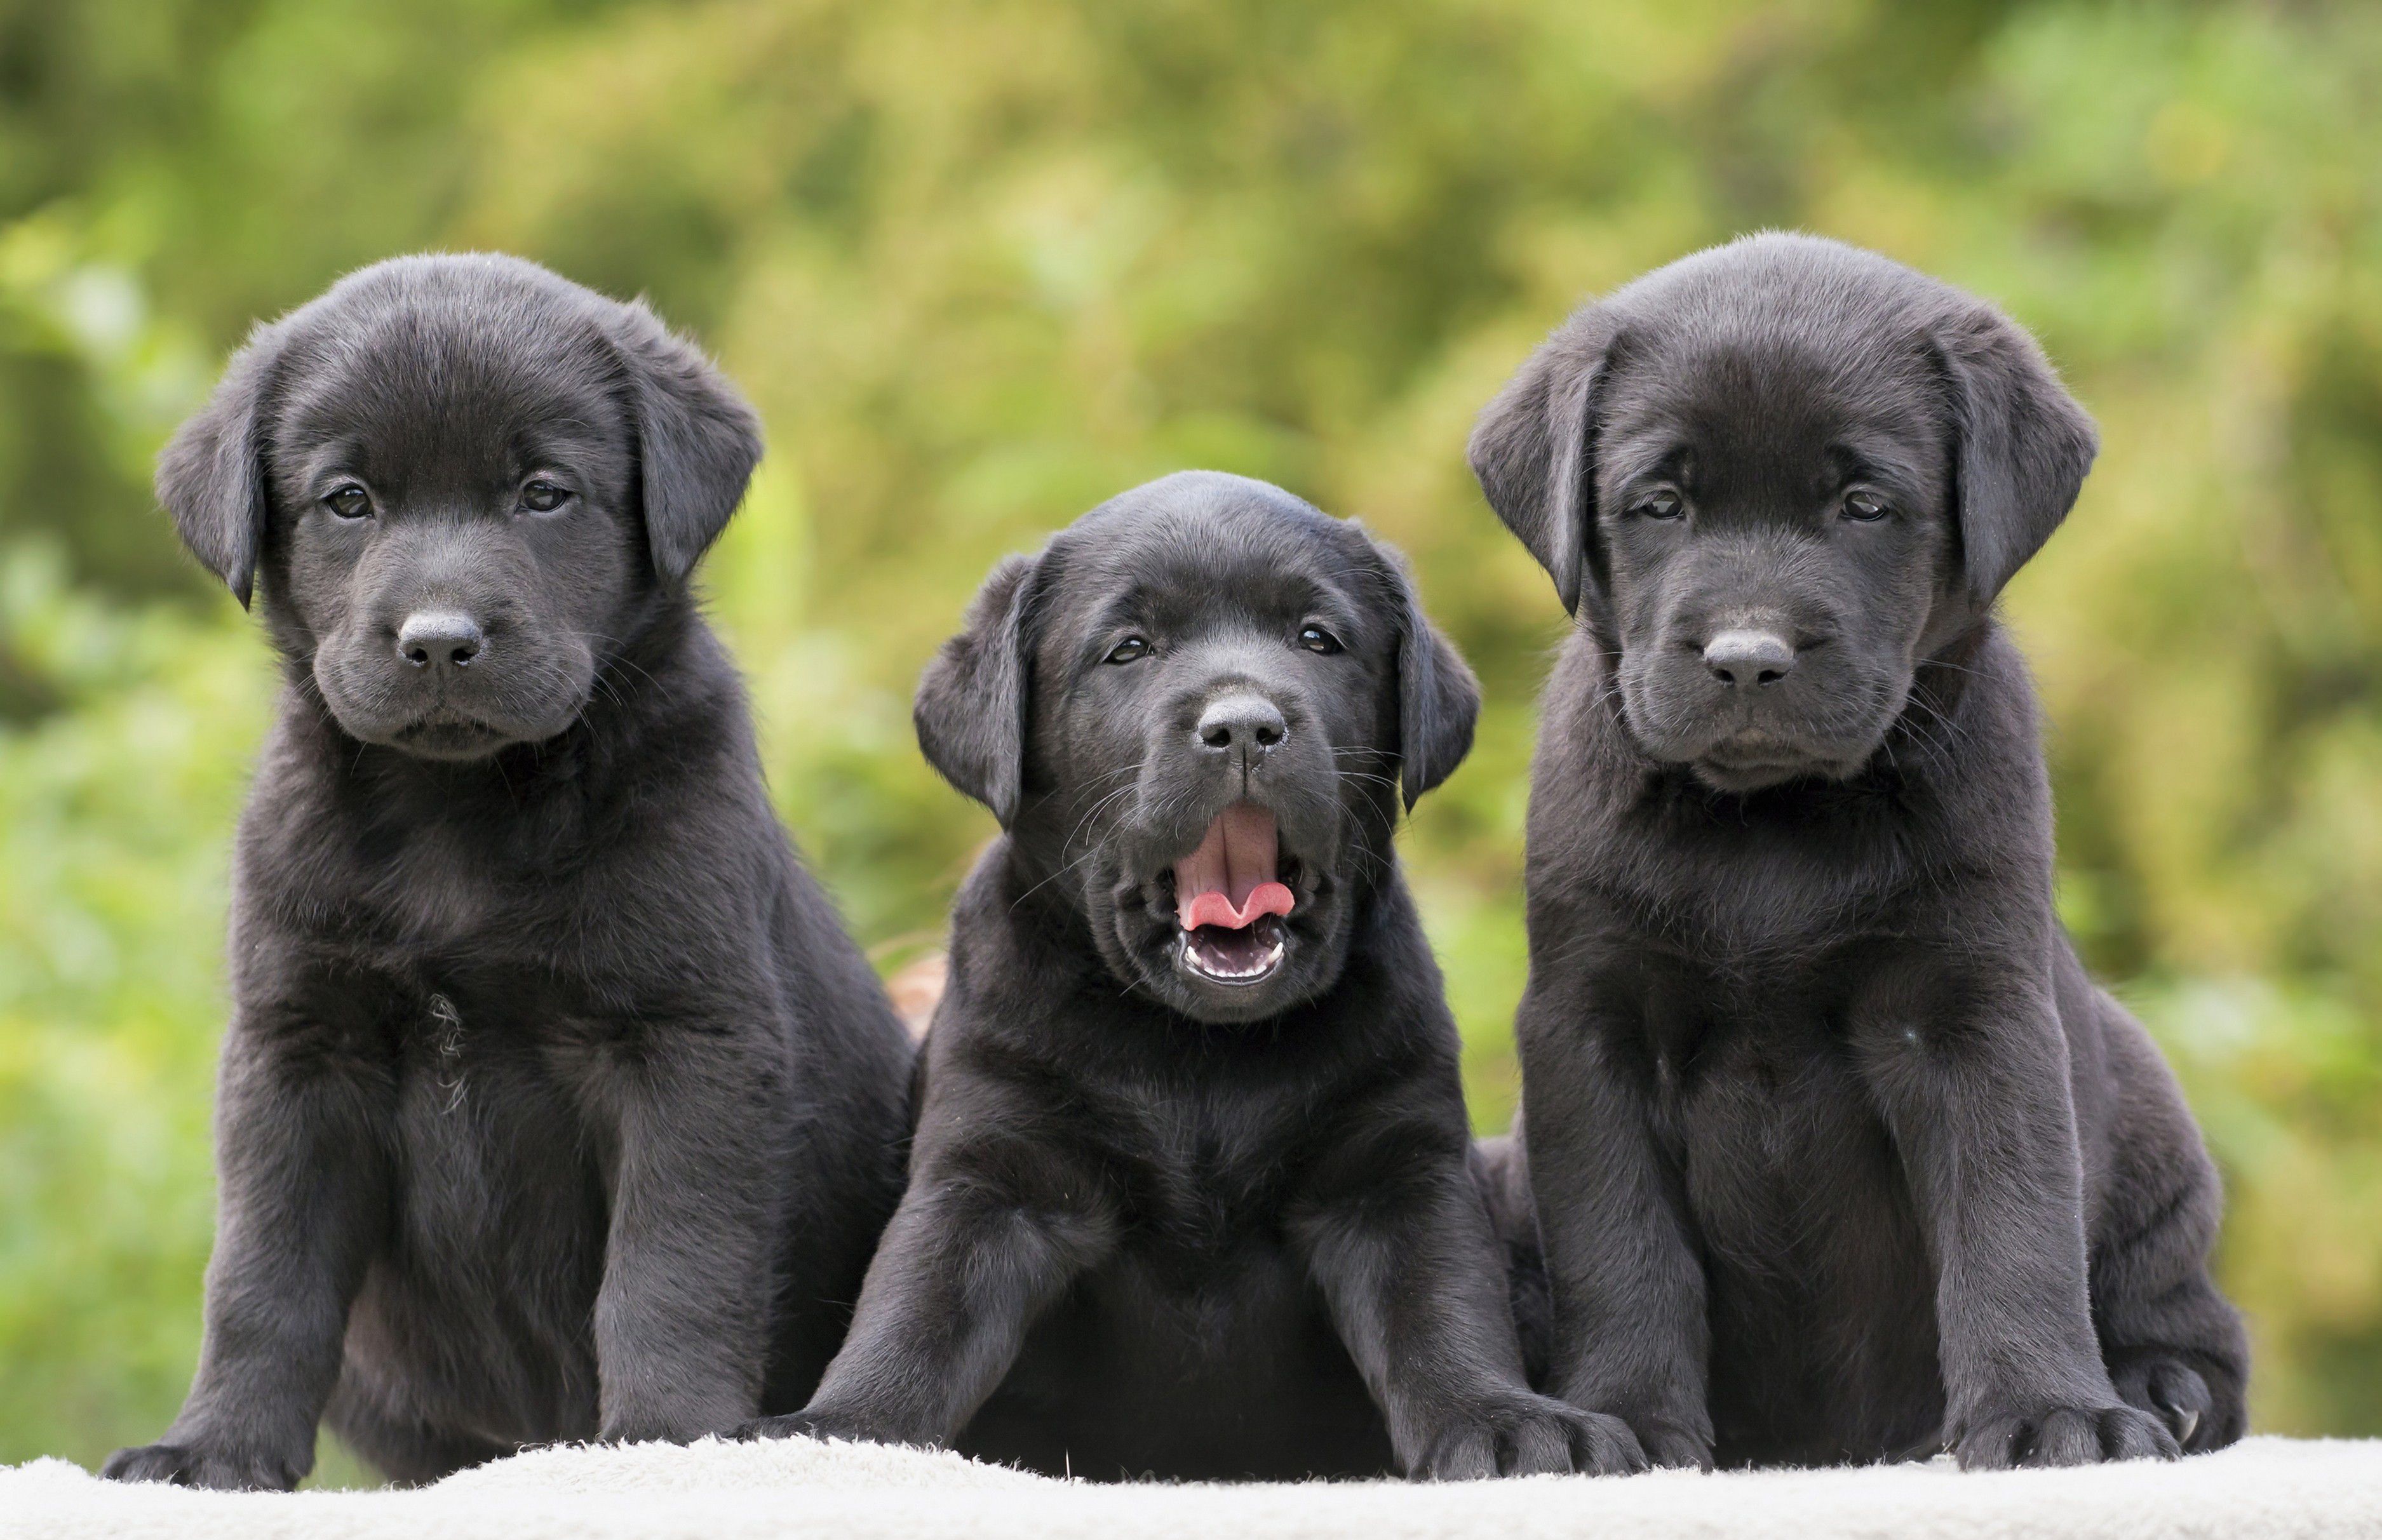 Cute Black Lab Puppies Wallpapers on WallpaperDog 3750x2425